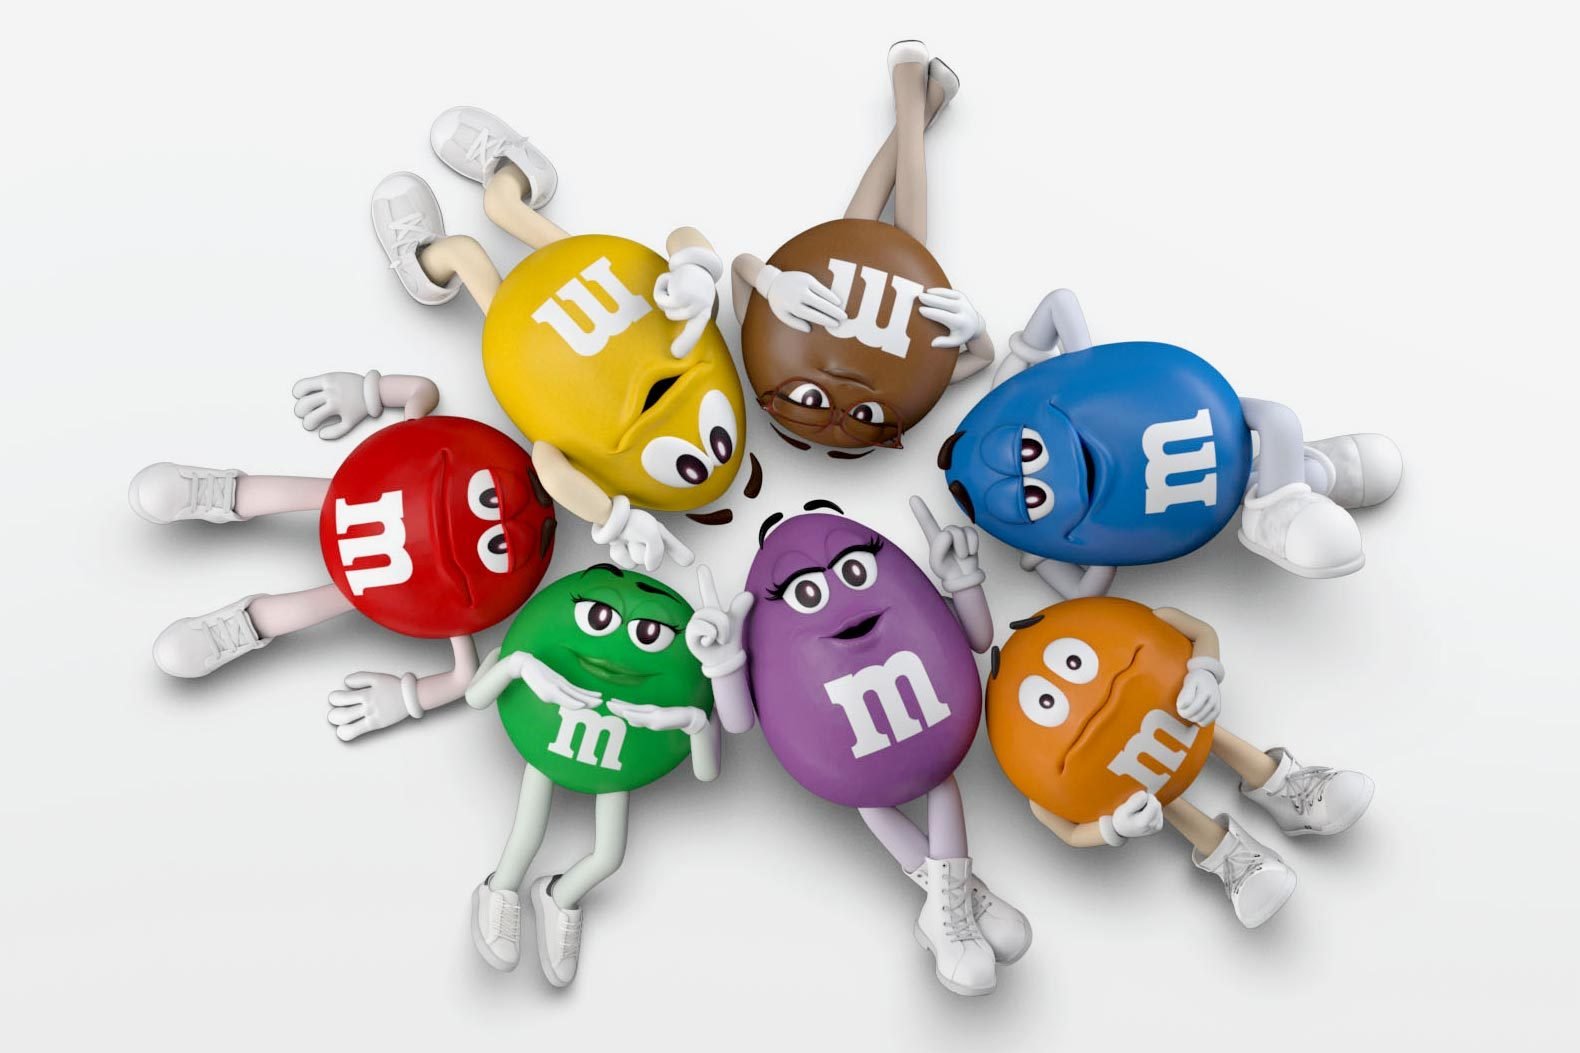 M&M'S USA - Sweeties, I'm honored that you voted green to be the